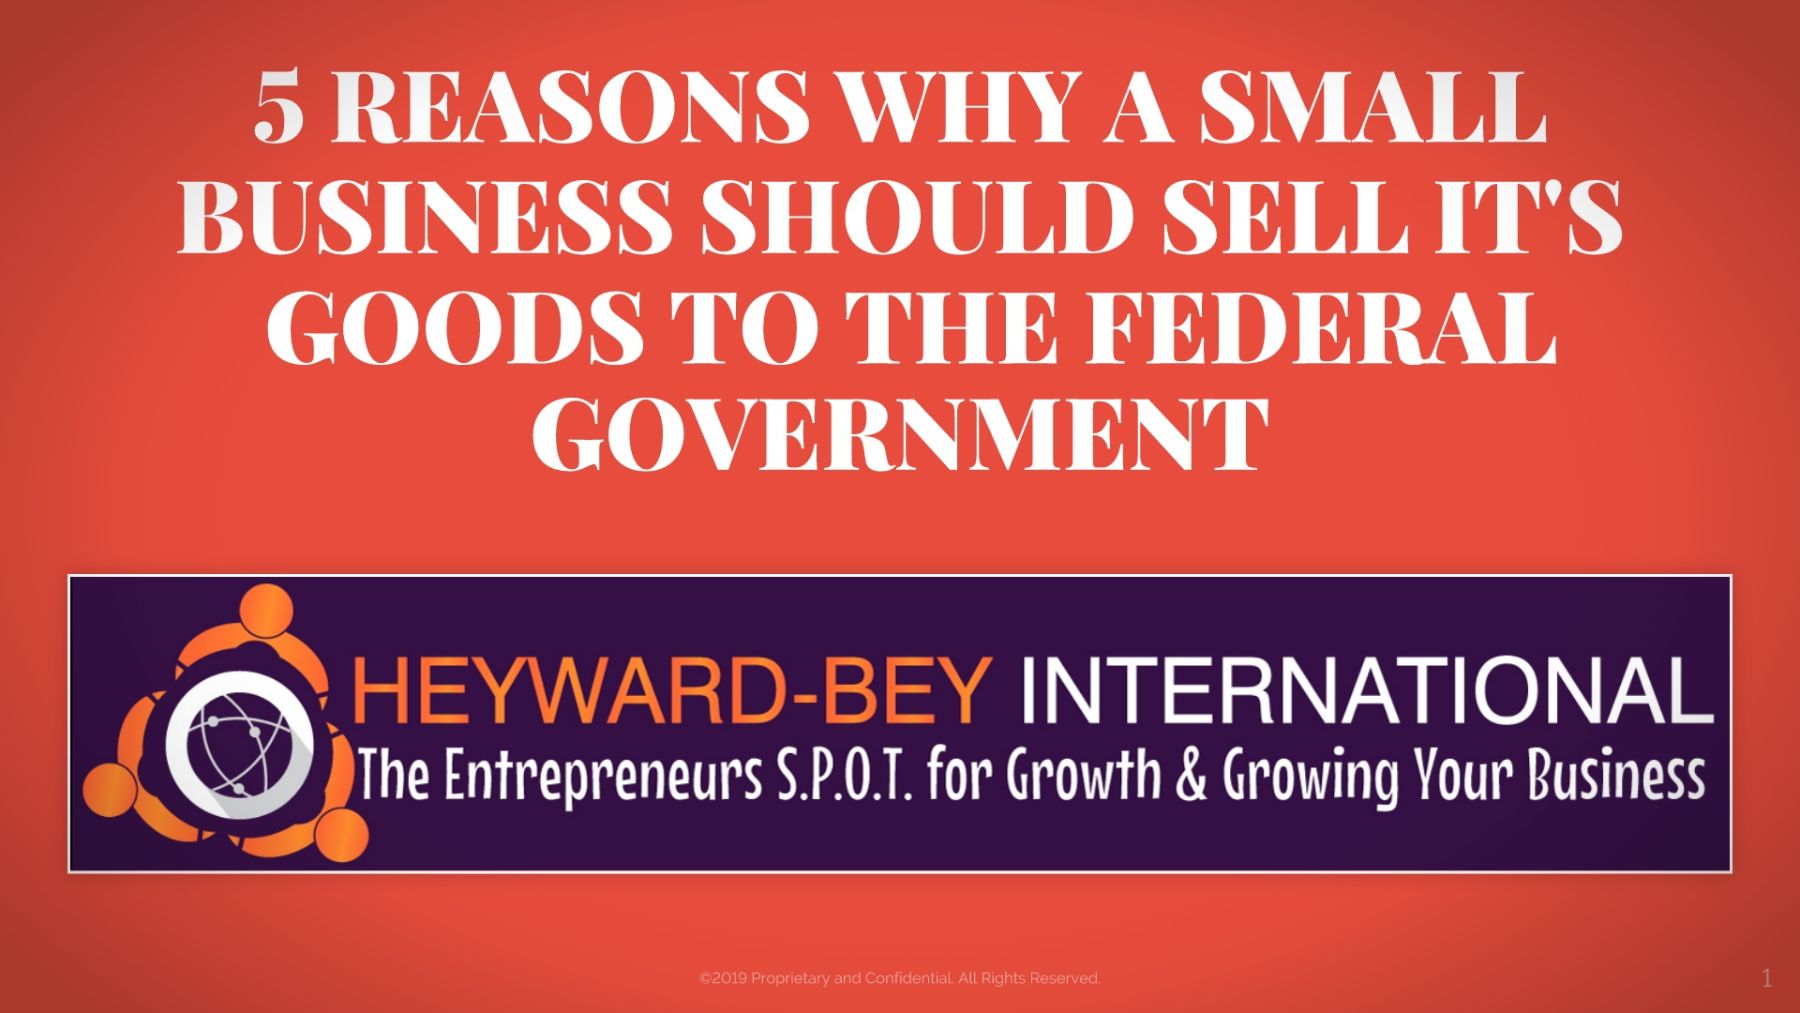 5 Reasons why a small business should sell its goods & services to the federal government